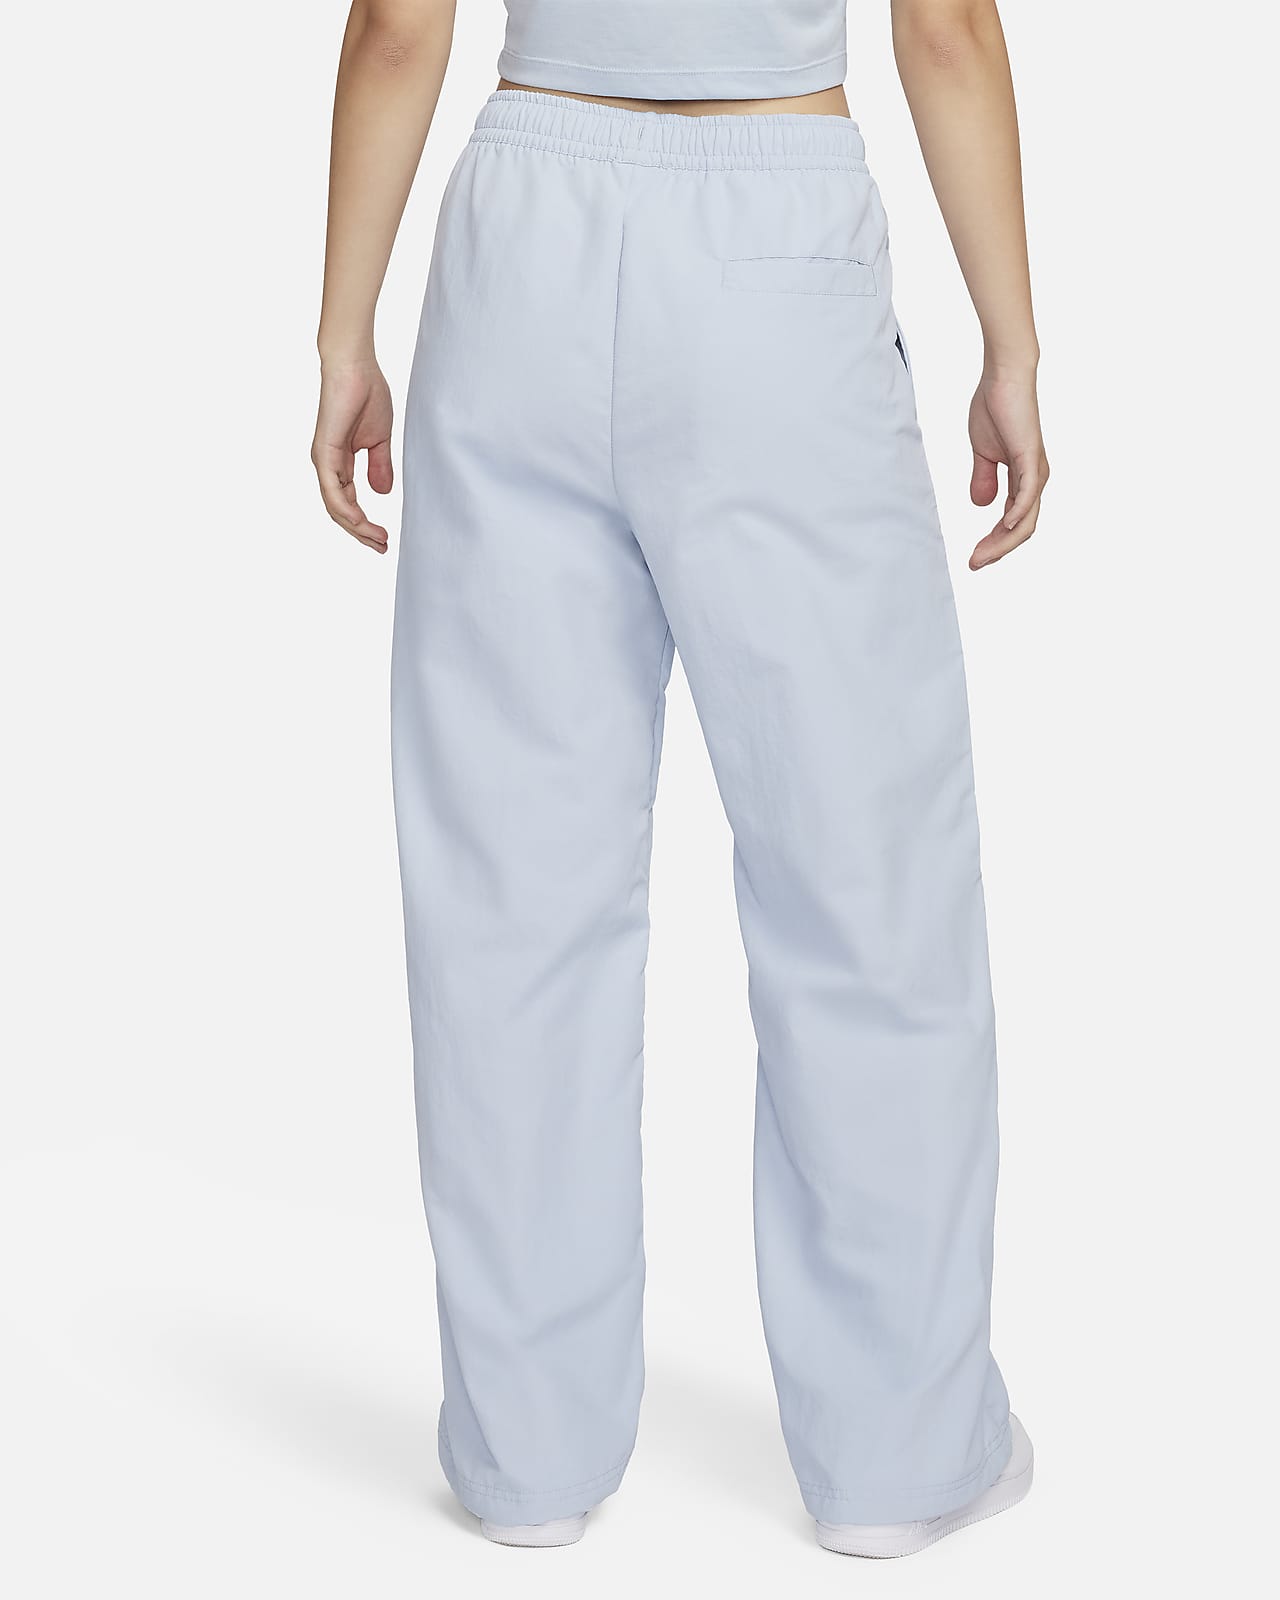 what colors would go well with this pair of blue pants? how would you style  it? : r/fashion